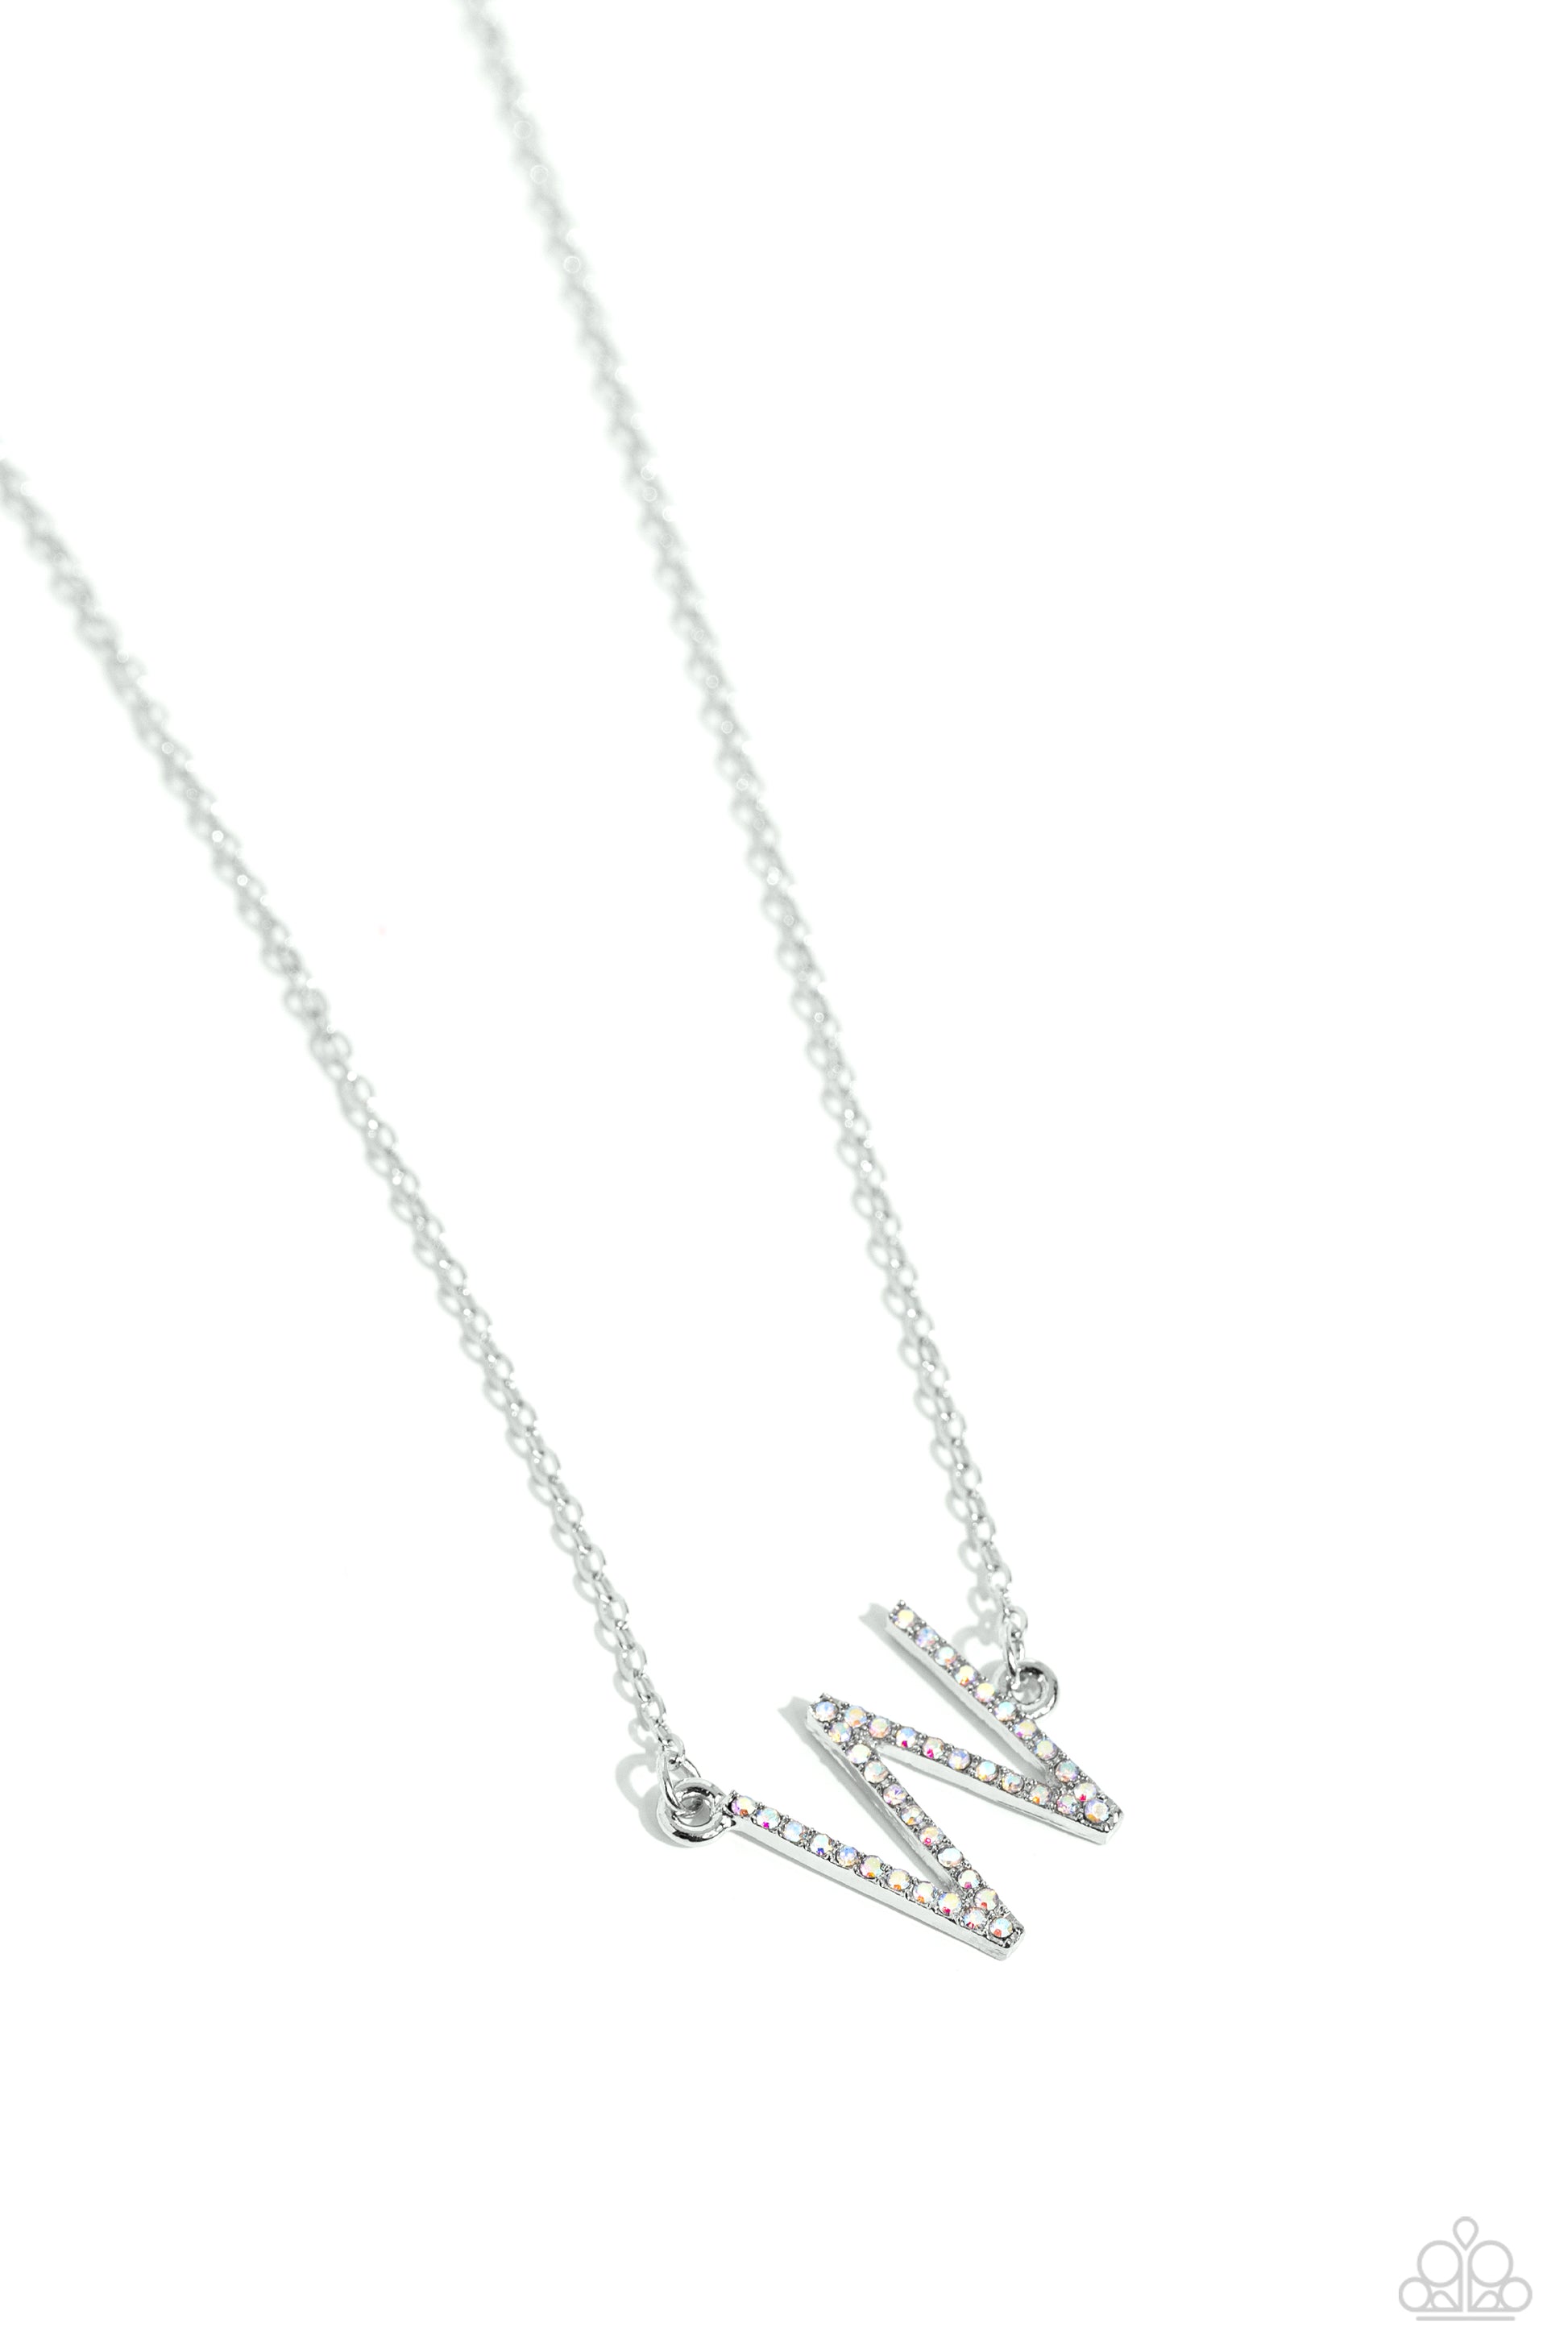 INITIALLY Yours Multi "W" Necklace - Paparazzi Accessories  Embossed with dainty iridescent rhinestones, a silver letter "W" hovers below the collar from a dainty silver chain, for a sentimentally simple design. Features an adjustable clasp closure. Due to its prismatic palette, color may vary.  Sold as one individual necklace. Includes one pair of matching earrings.  P2DA-MTXX-146XX